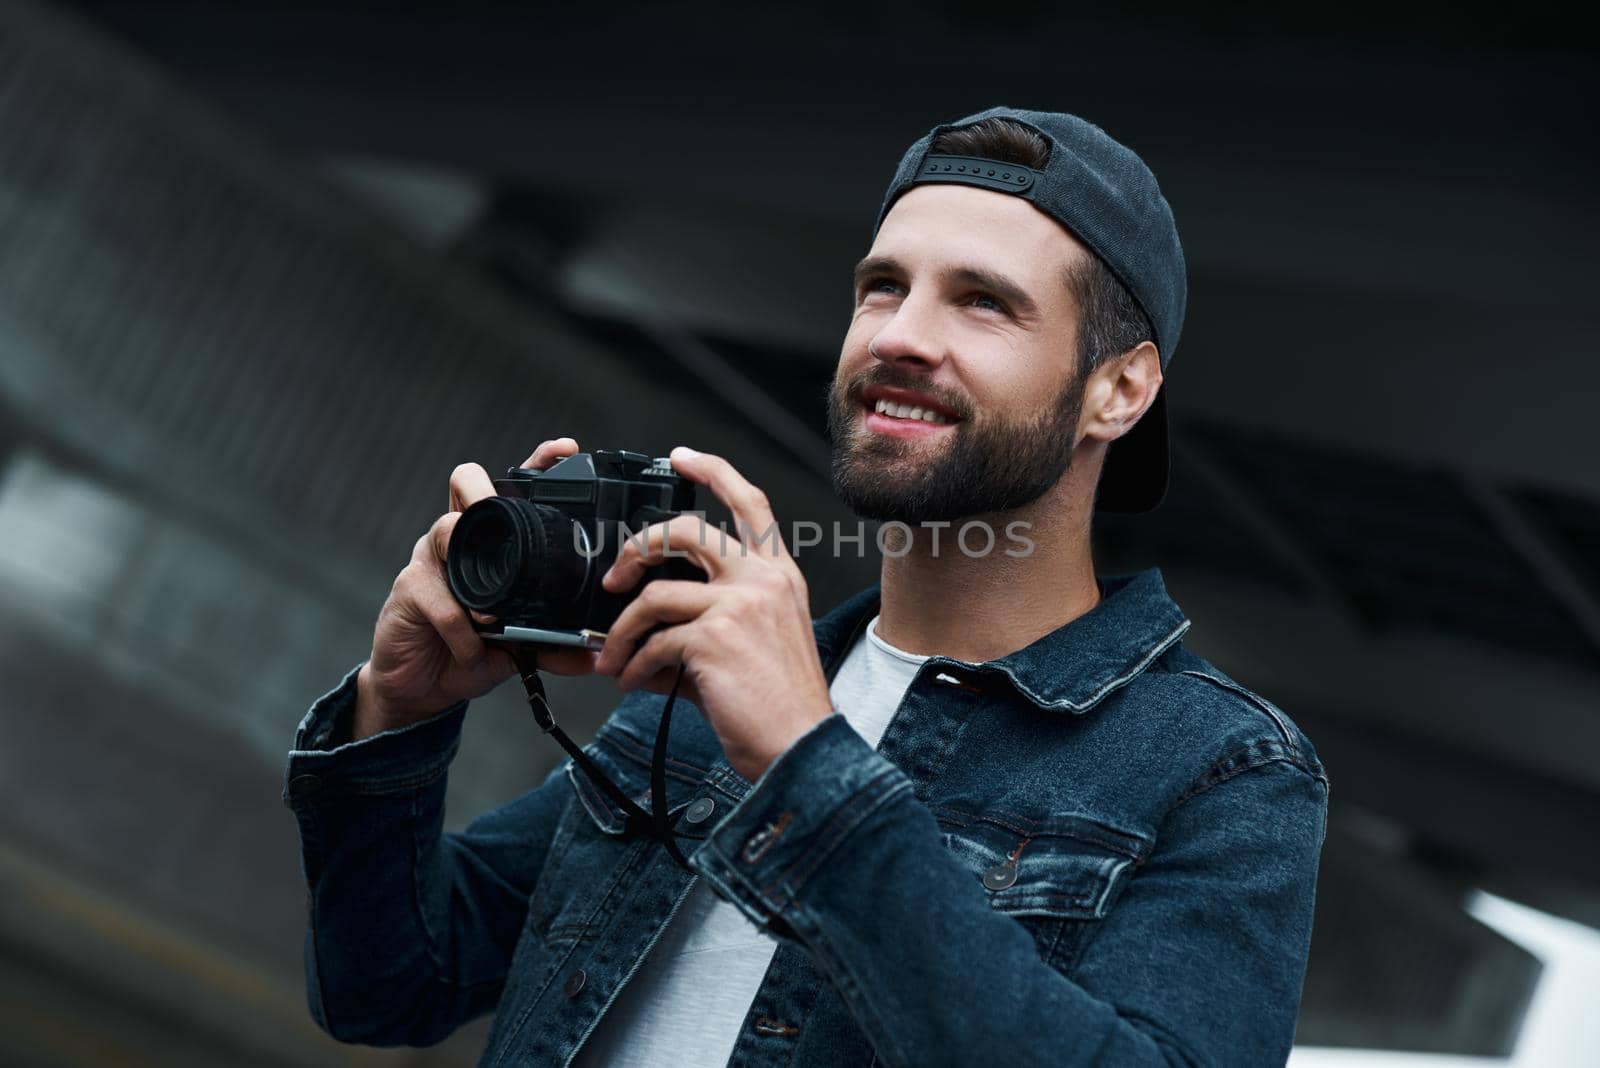 Photography hobby. Young stylish man standing on city street taking photos on camera looking forward smiling joyful close-up by friendsstock